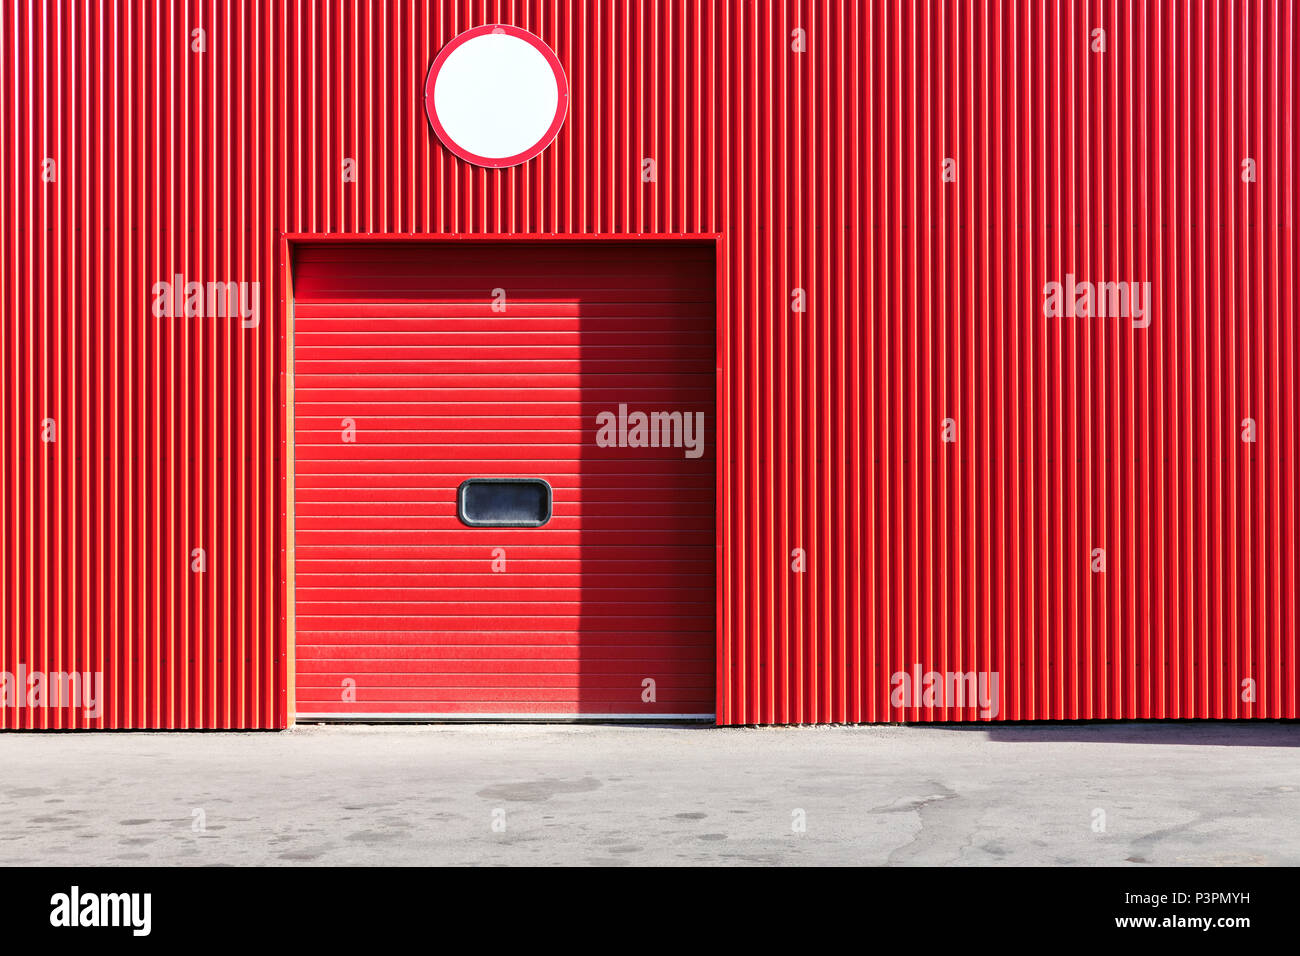 red metal warehouse wall with closed roller shutter door Stock Photo